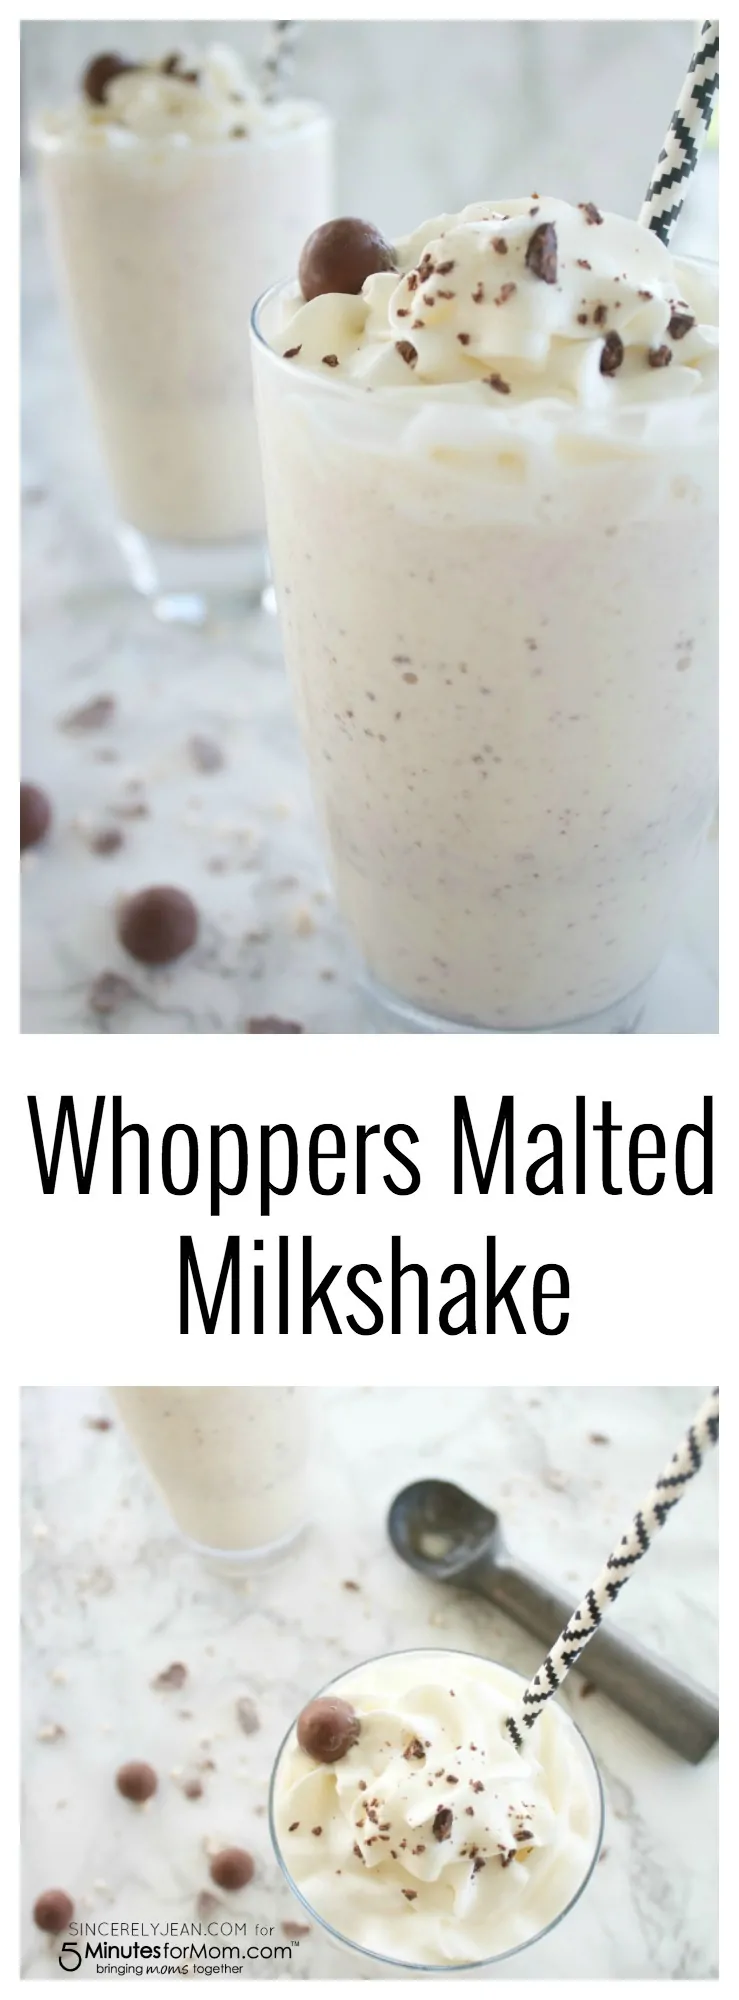 Whoppers malted milk shake